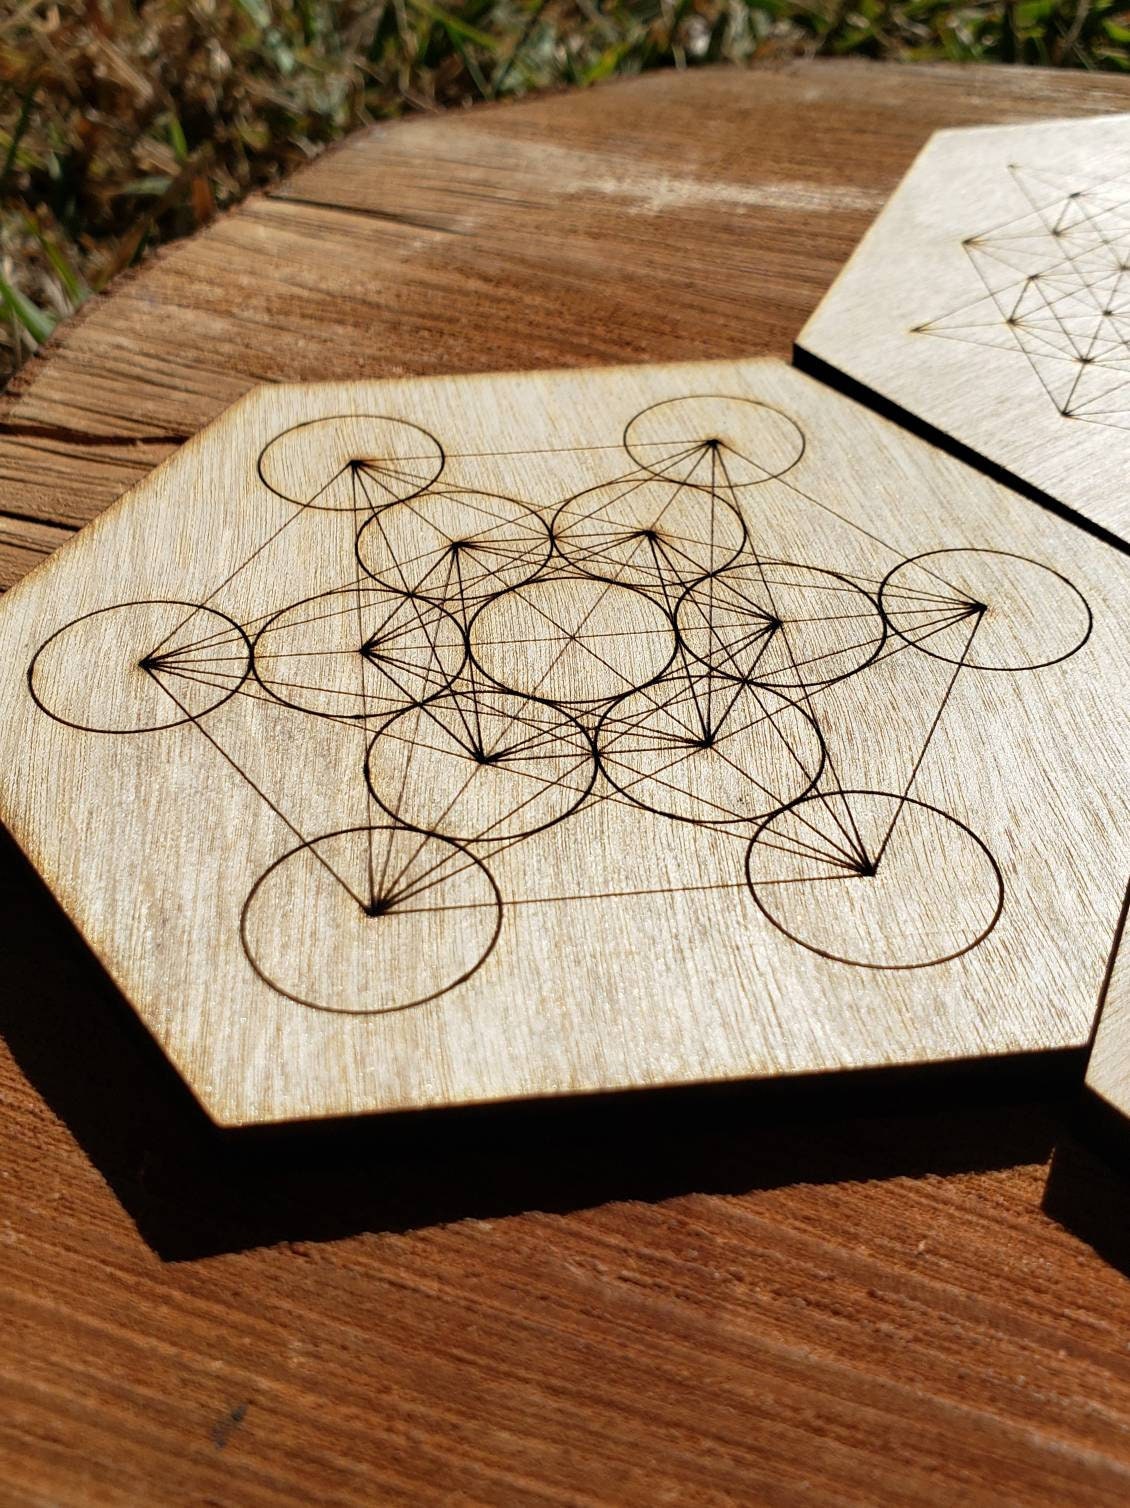 ONE Sacred Geometry Coaster or Mini Crystal Grid - Flower Of Life, 64 Tetrahedron, Metatron - LaserEngraved from Sustainably Grown Wood